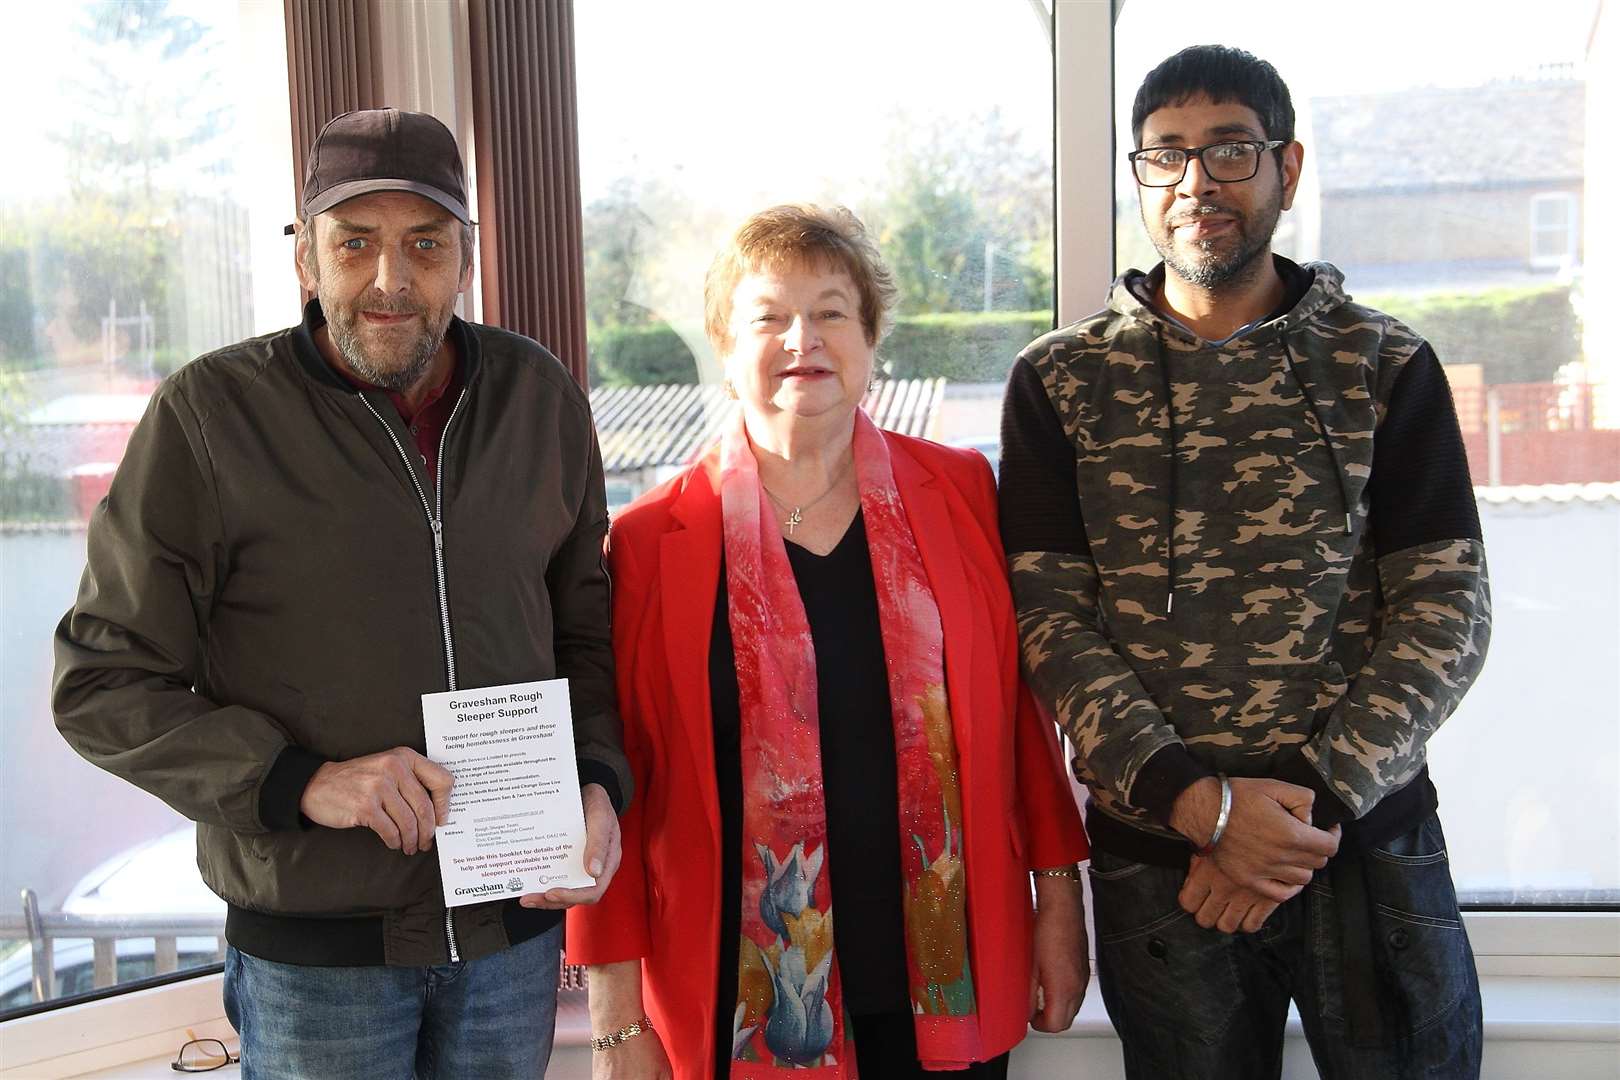 Cllr Jenny Wallace welcomes the first guests, Alan and Jaz, to the new supported accommodation in Wrotham Road, Gravesend. Photo: Gravesham council